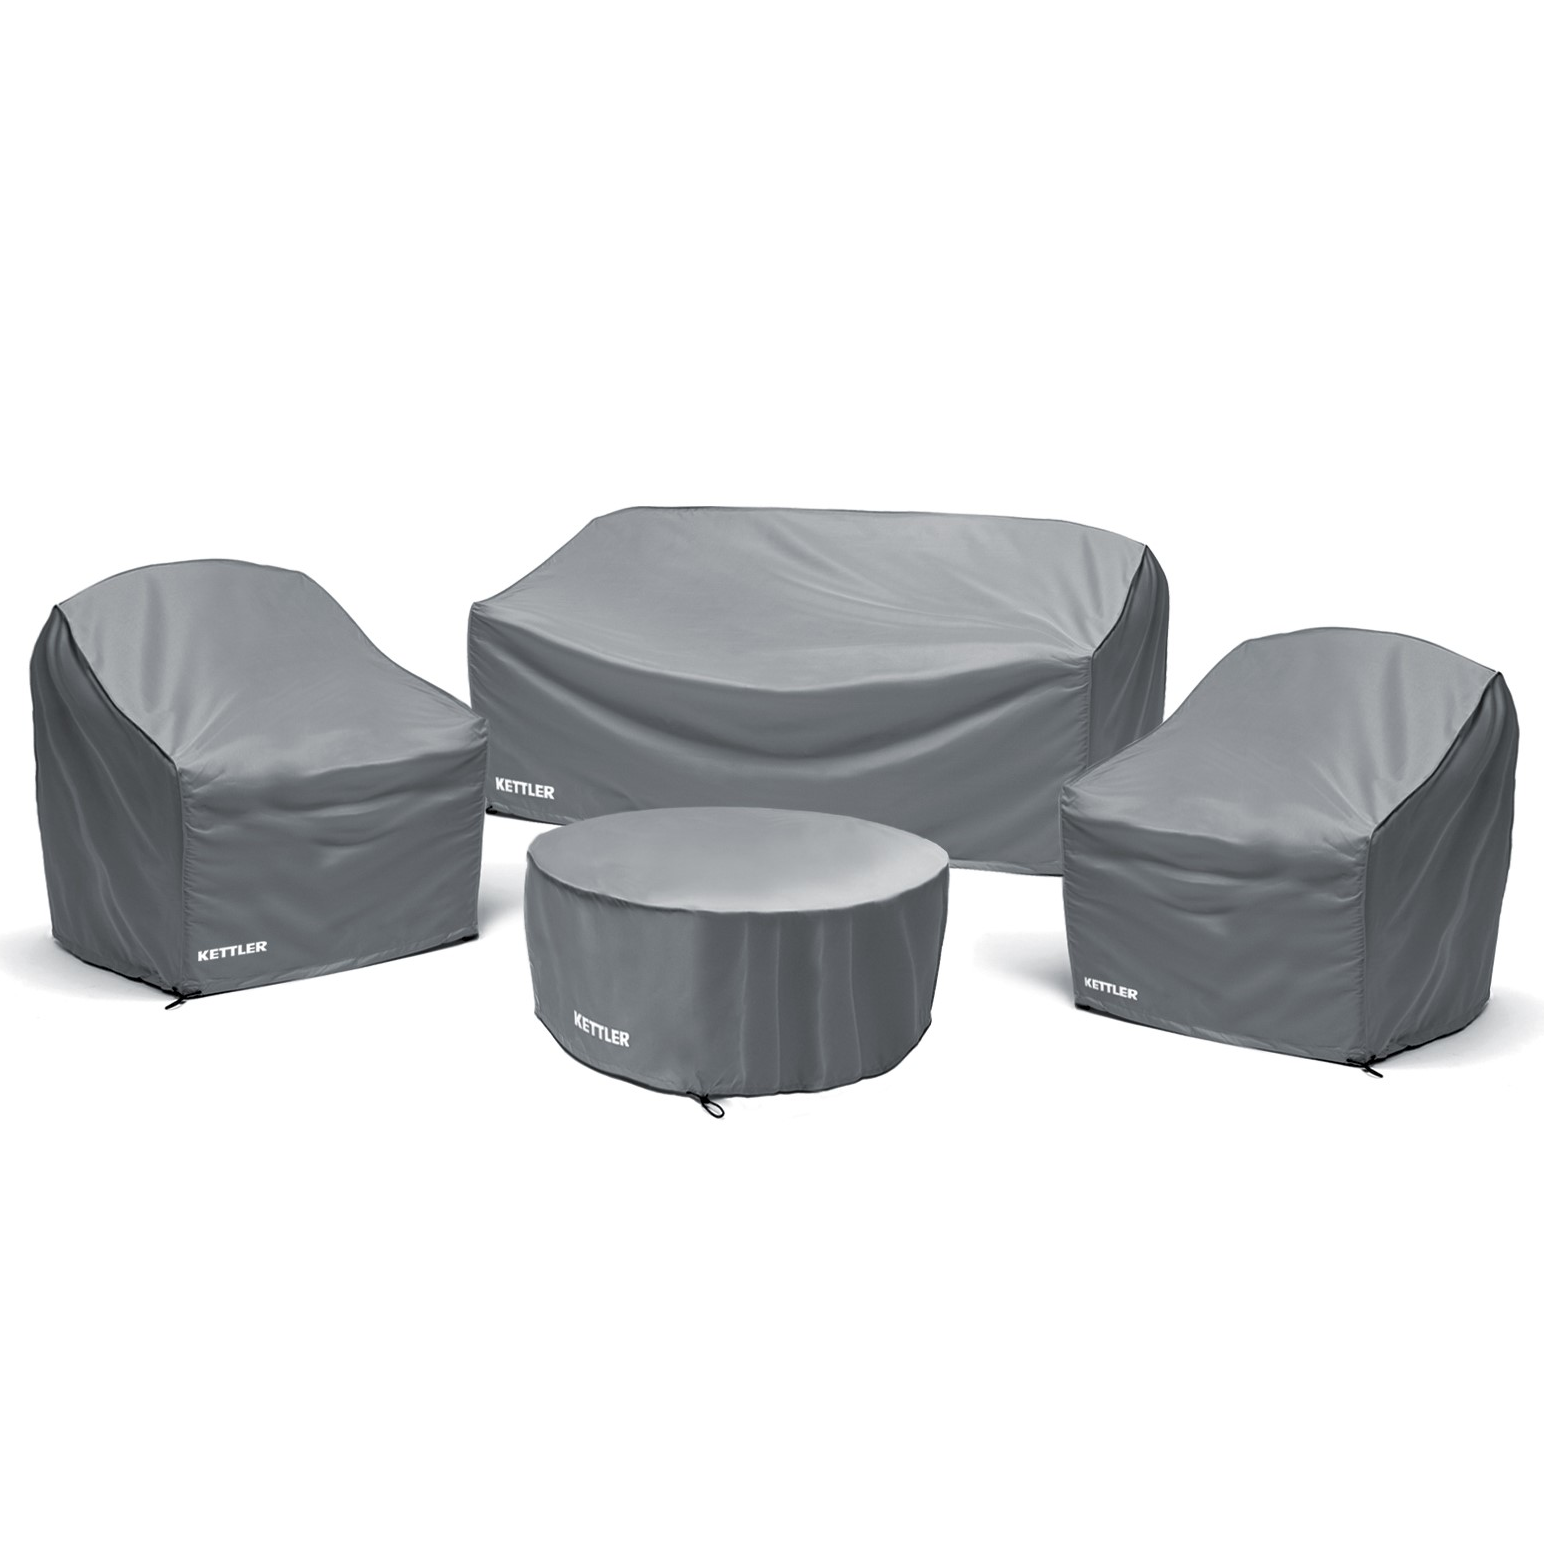 Small Image of Kettler Fiji Lounge Set Protective Cover